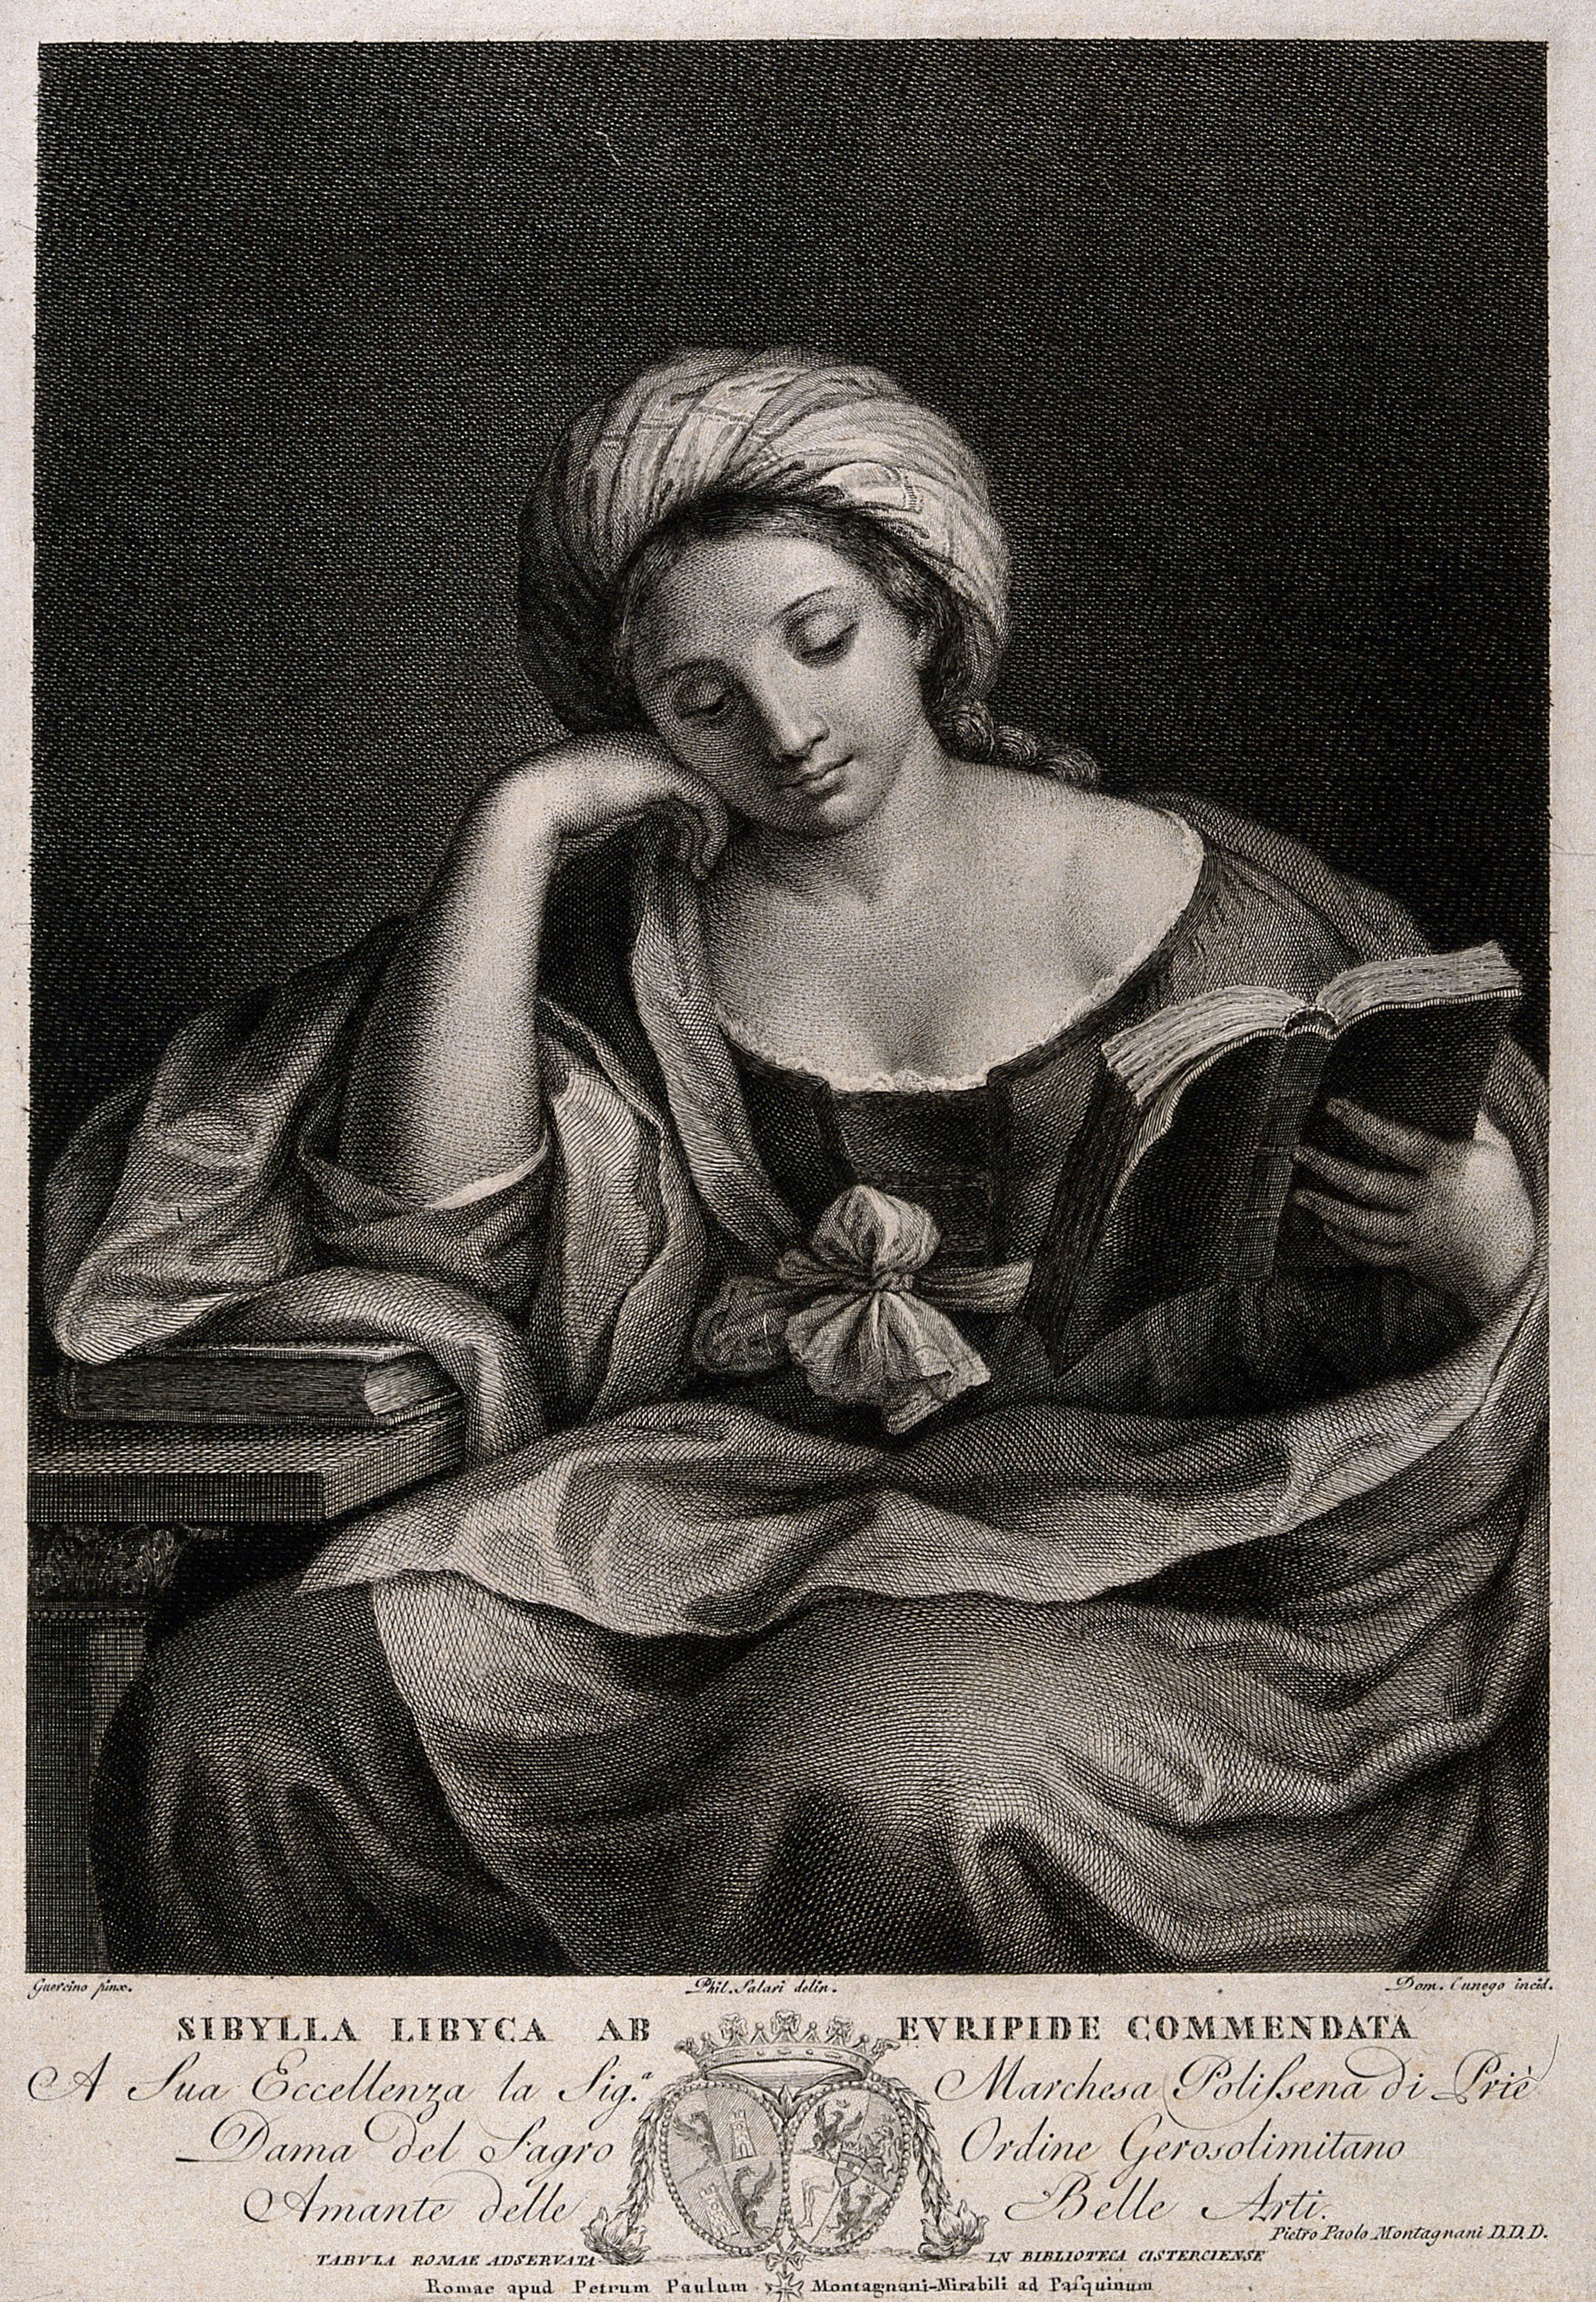 The Libyan sibyl. Engraving by D. Cunego after P. Salari after G.F. Barbieri, il Guercino.